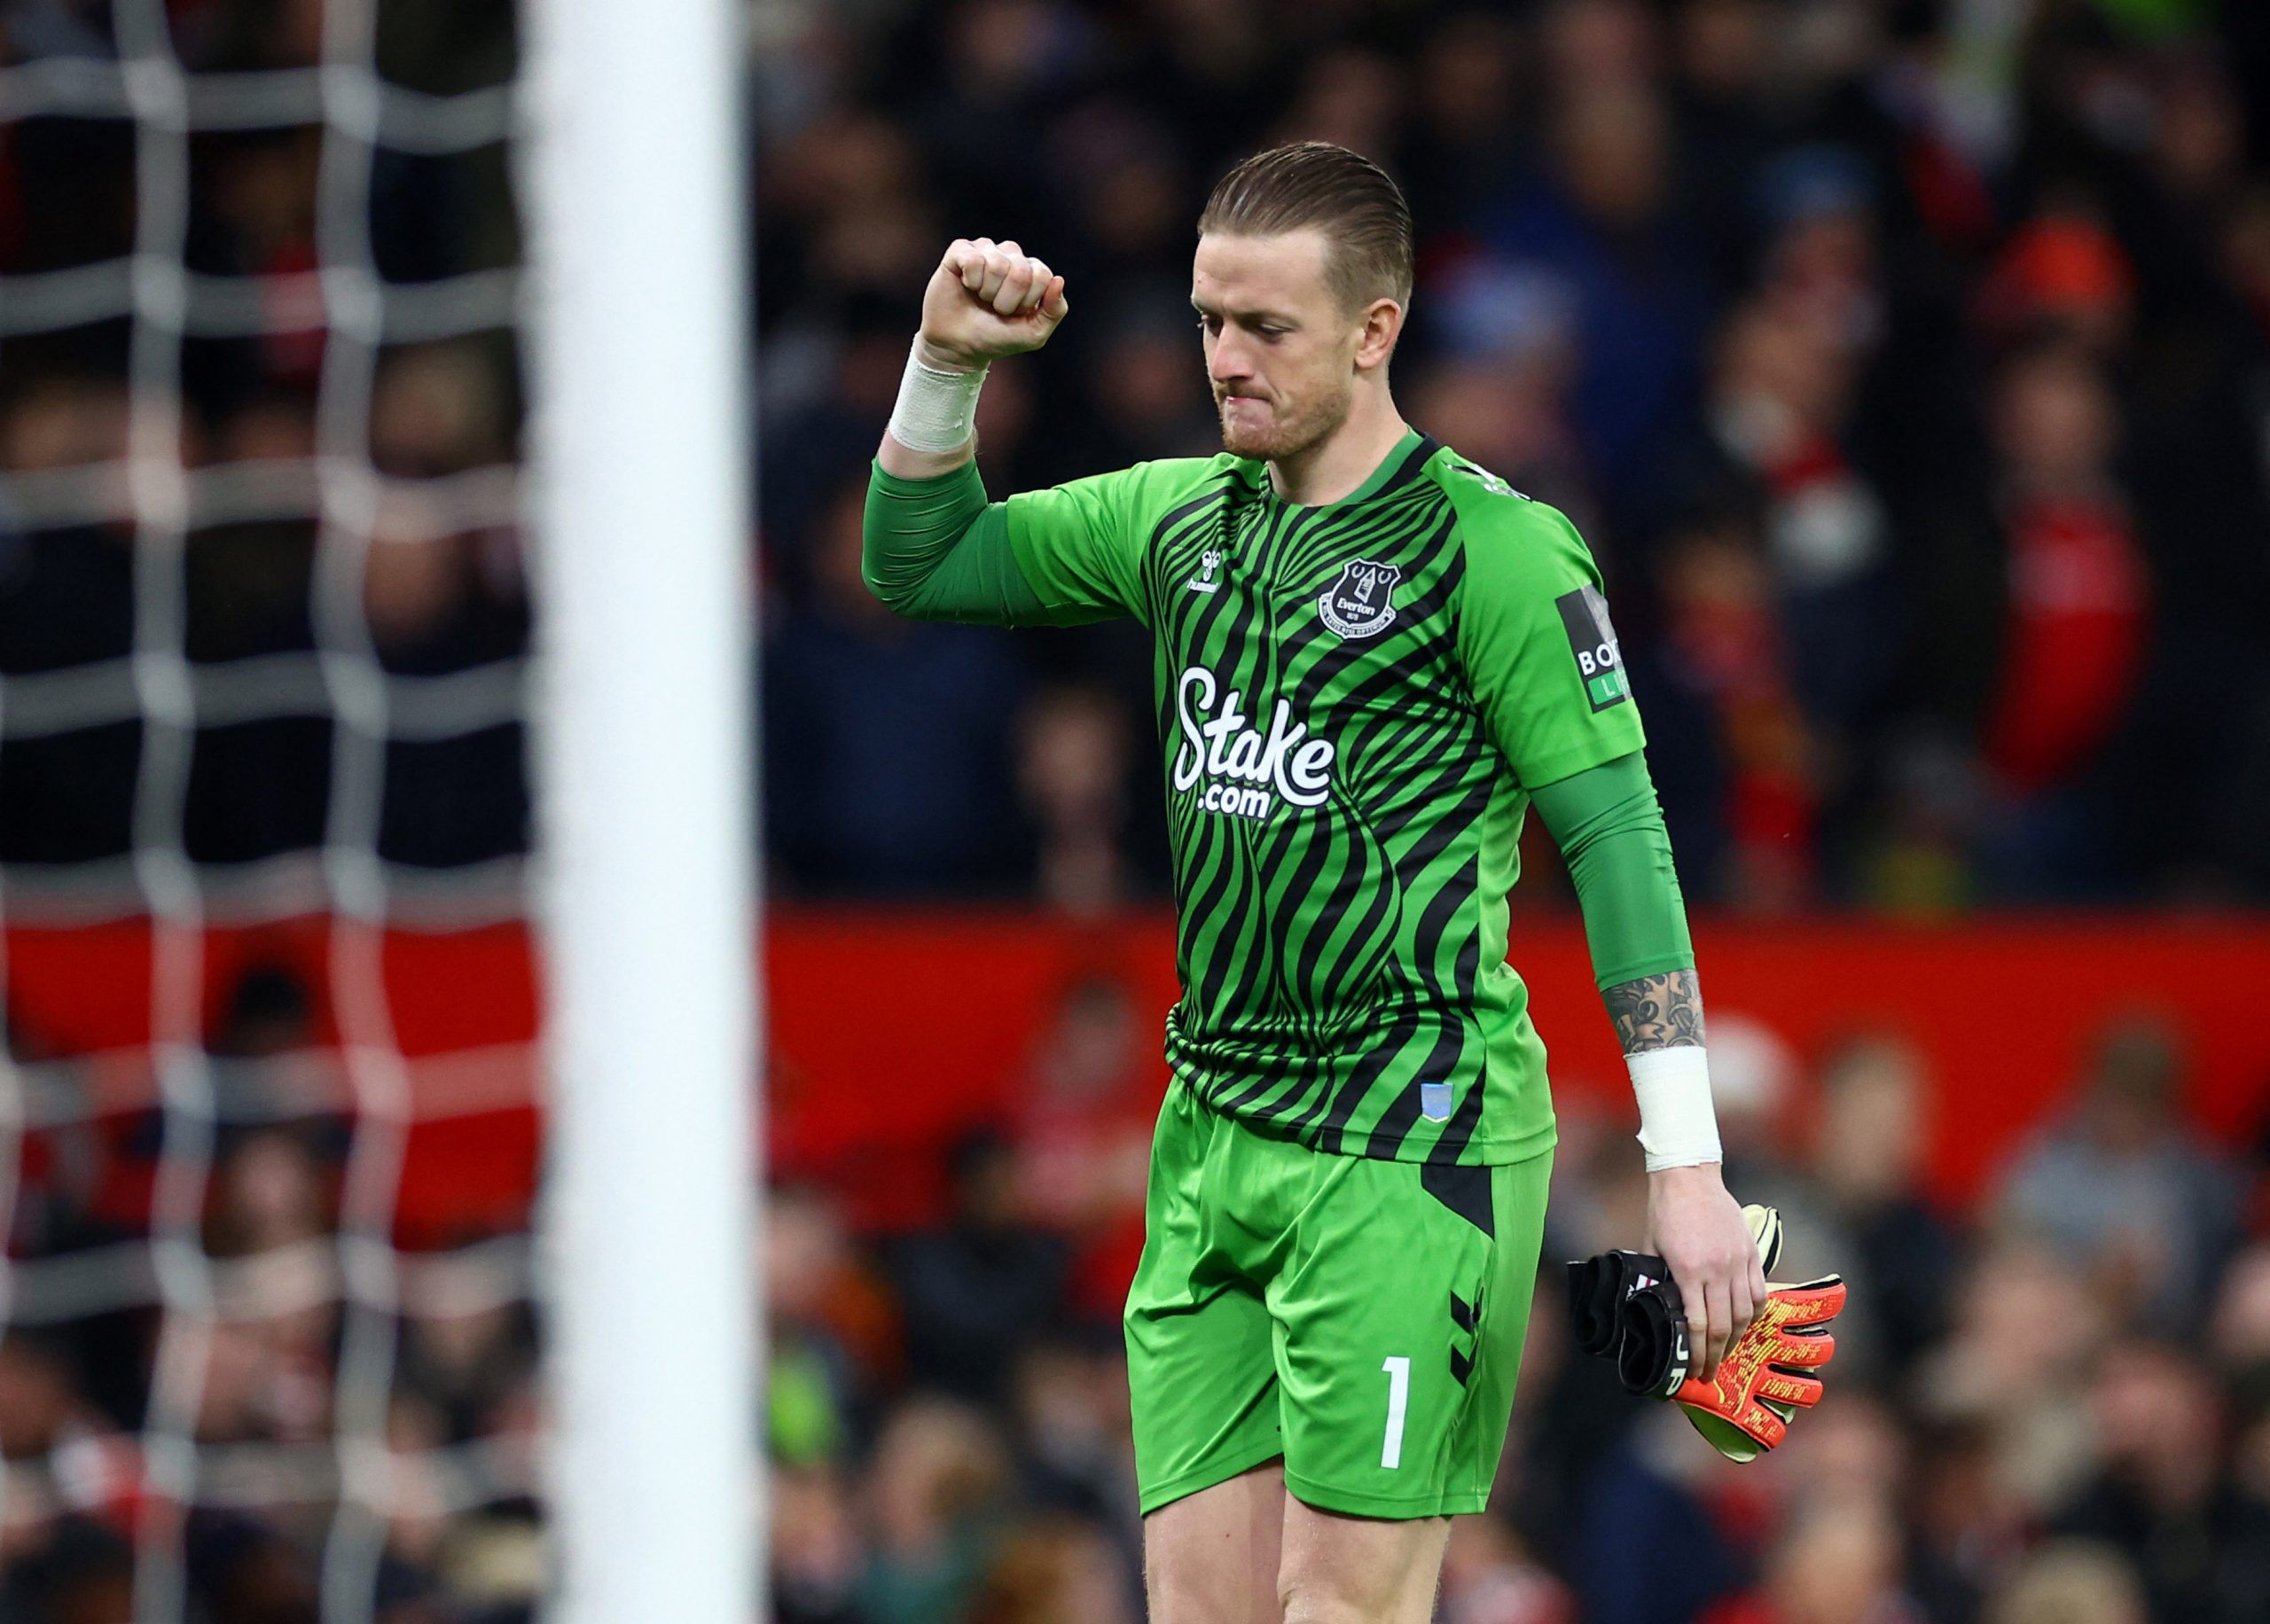 Soccer Football - FA Cup Third Round - Manchester United v Everton - Old Trafford, Manchester, Britain - January 6, 2023 Everton's Jordan Pickford gestures before the match REUTERS/Carl Recine